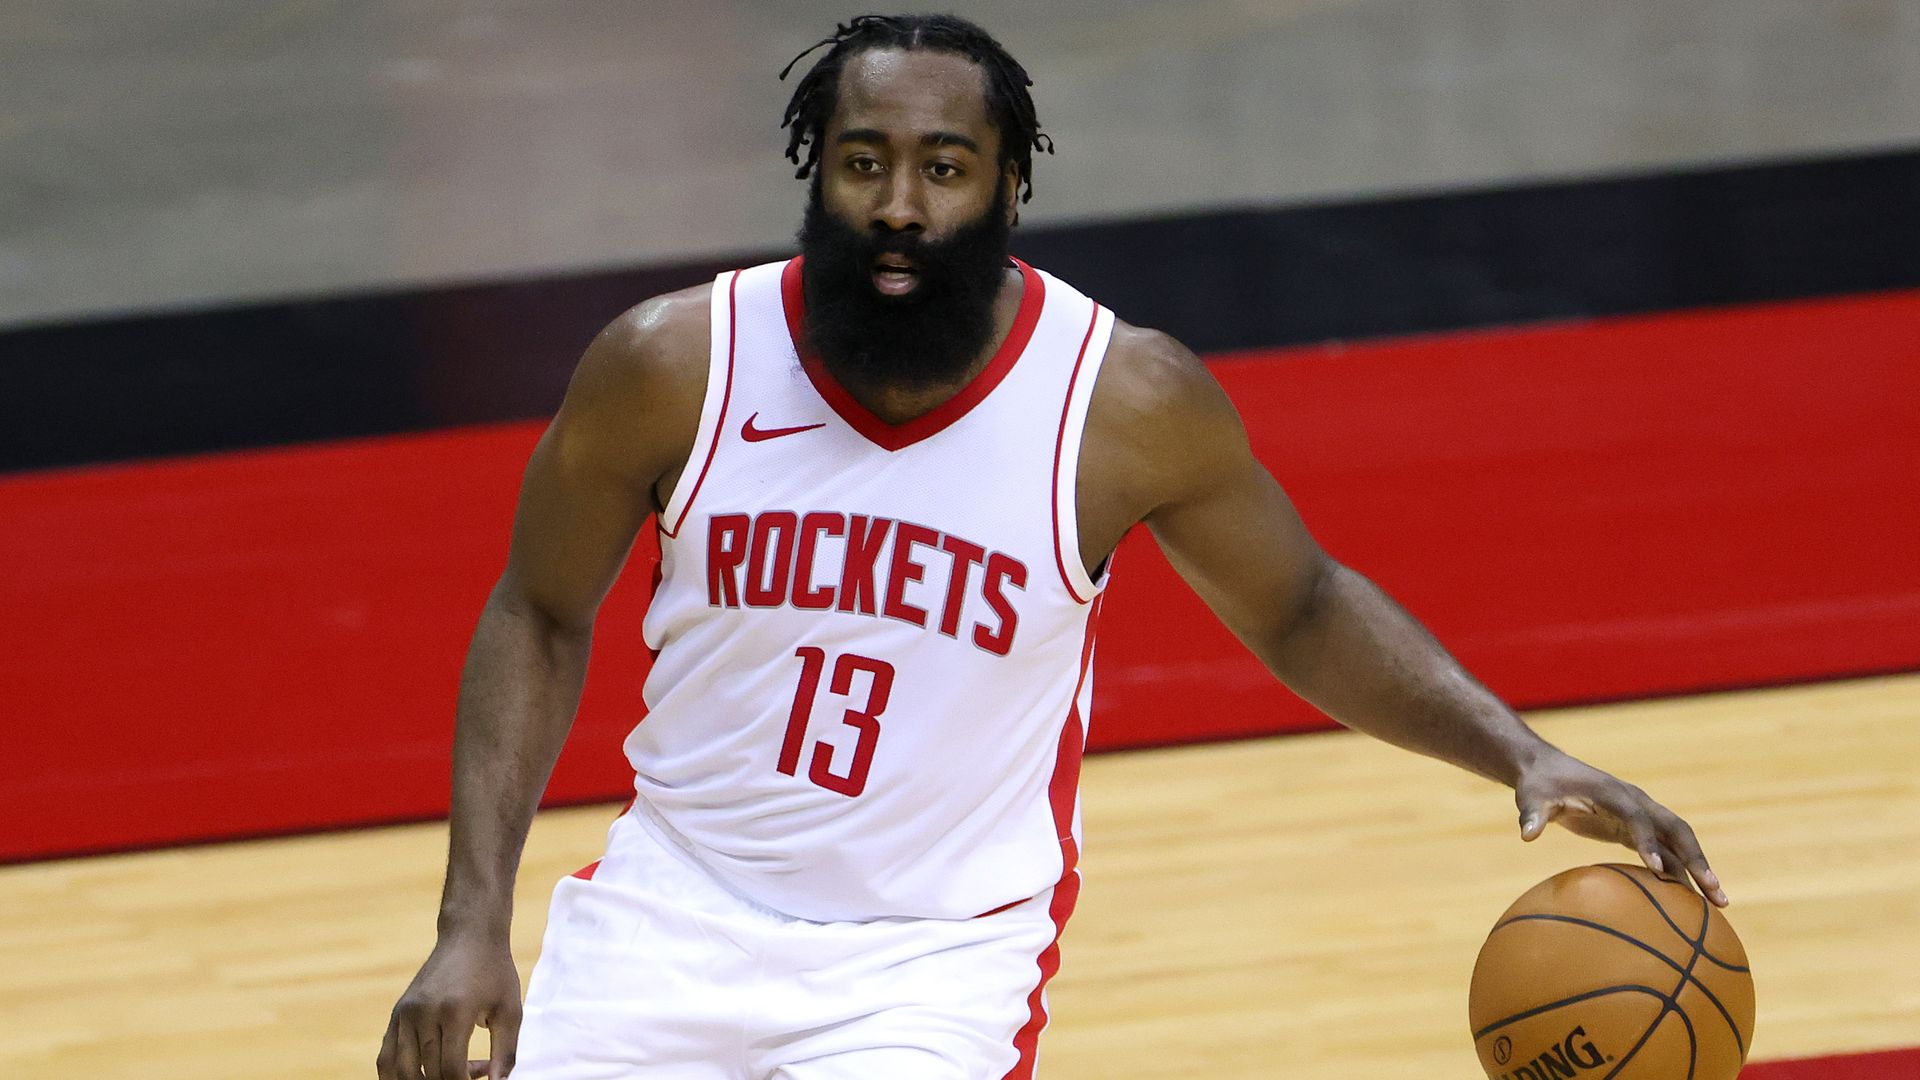 James Harden #13 of the Houston Rockets controls the ball during the first half of a game against the San Antonio Spurs at the Toyota Center on December 17, 2020 in Houston, Texas